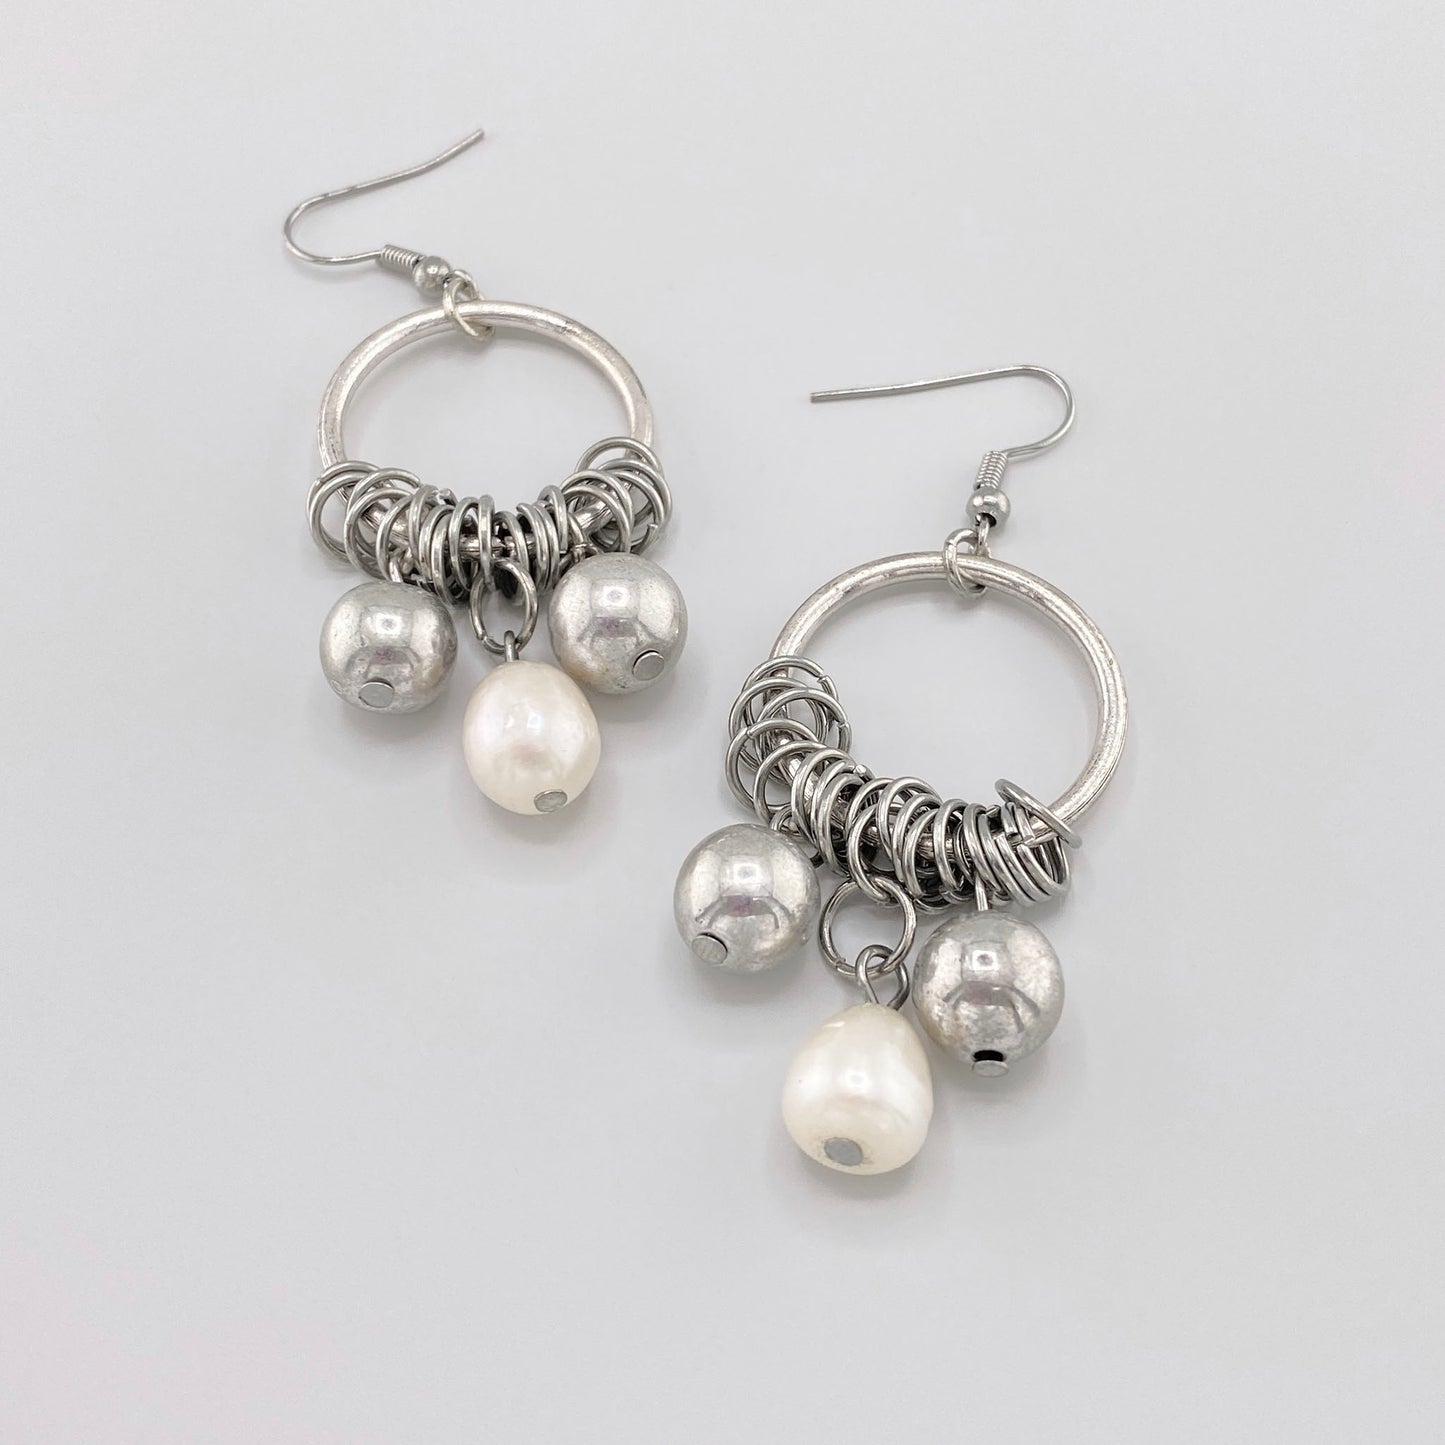 earrings with balls